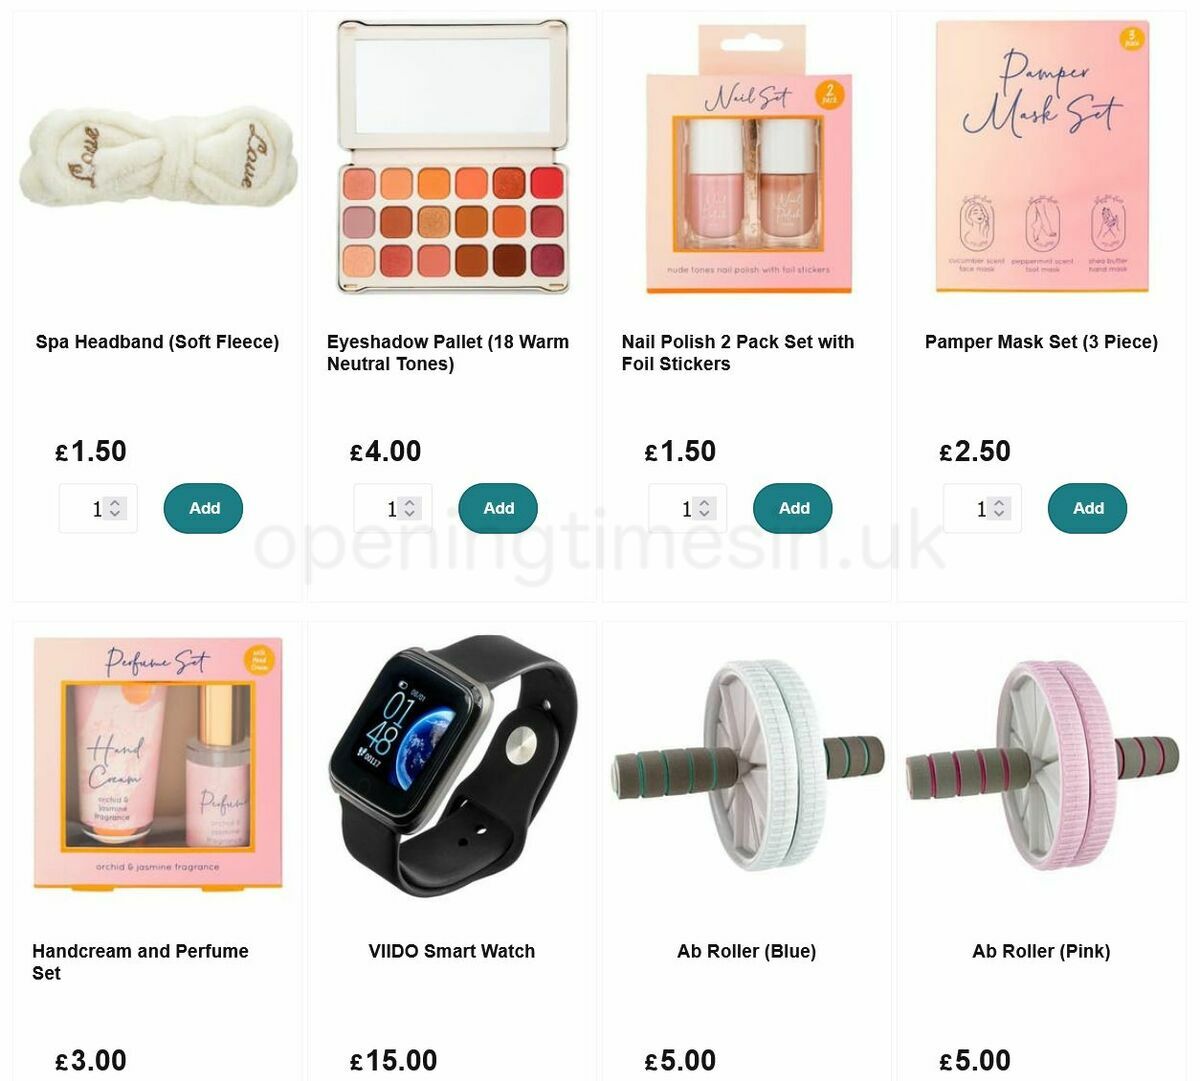 Poundland Offers from 21 February